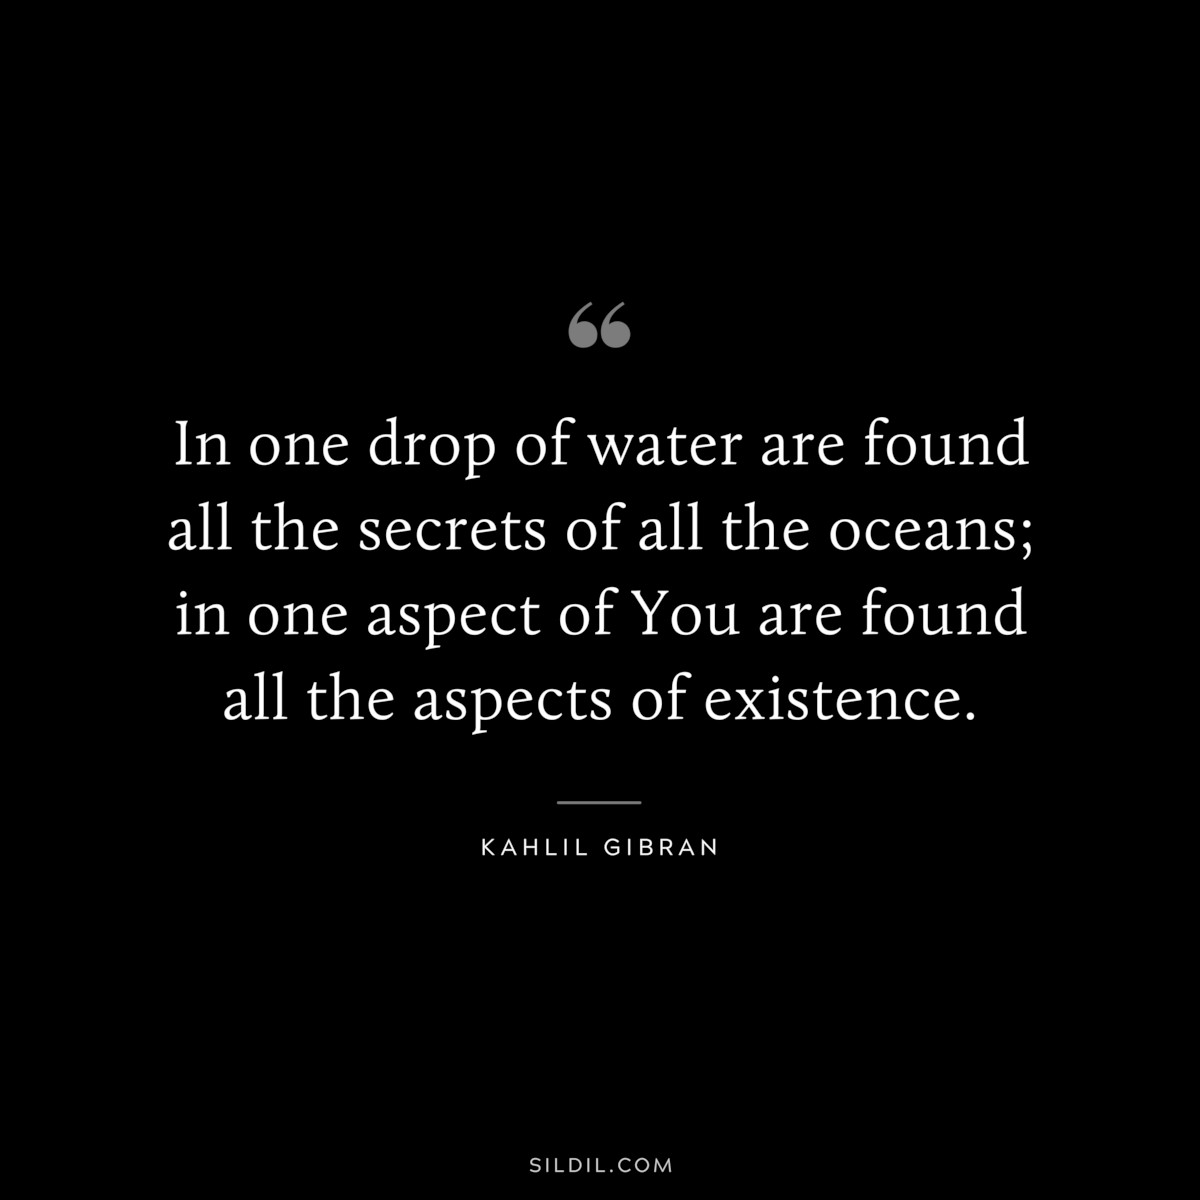 In one drop of water are found all the secrets of all the oceans; in one aspect of You are found all the aspects of existence. ― Kahlil Gibran